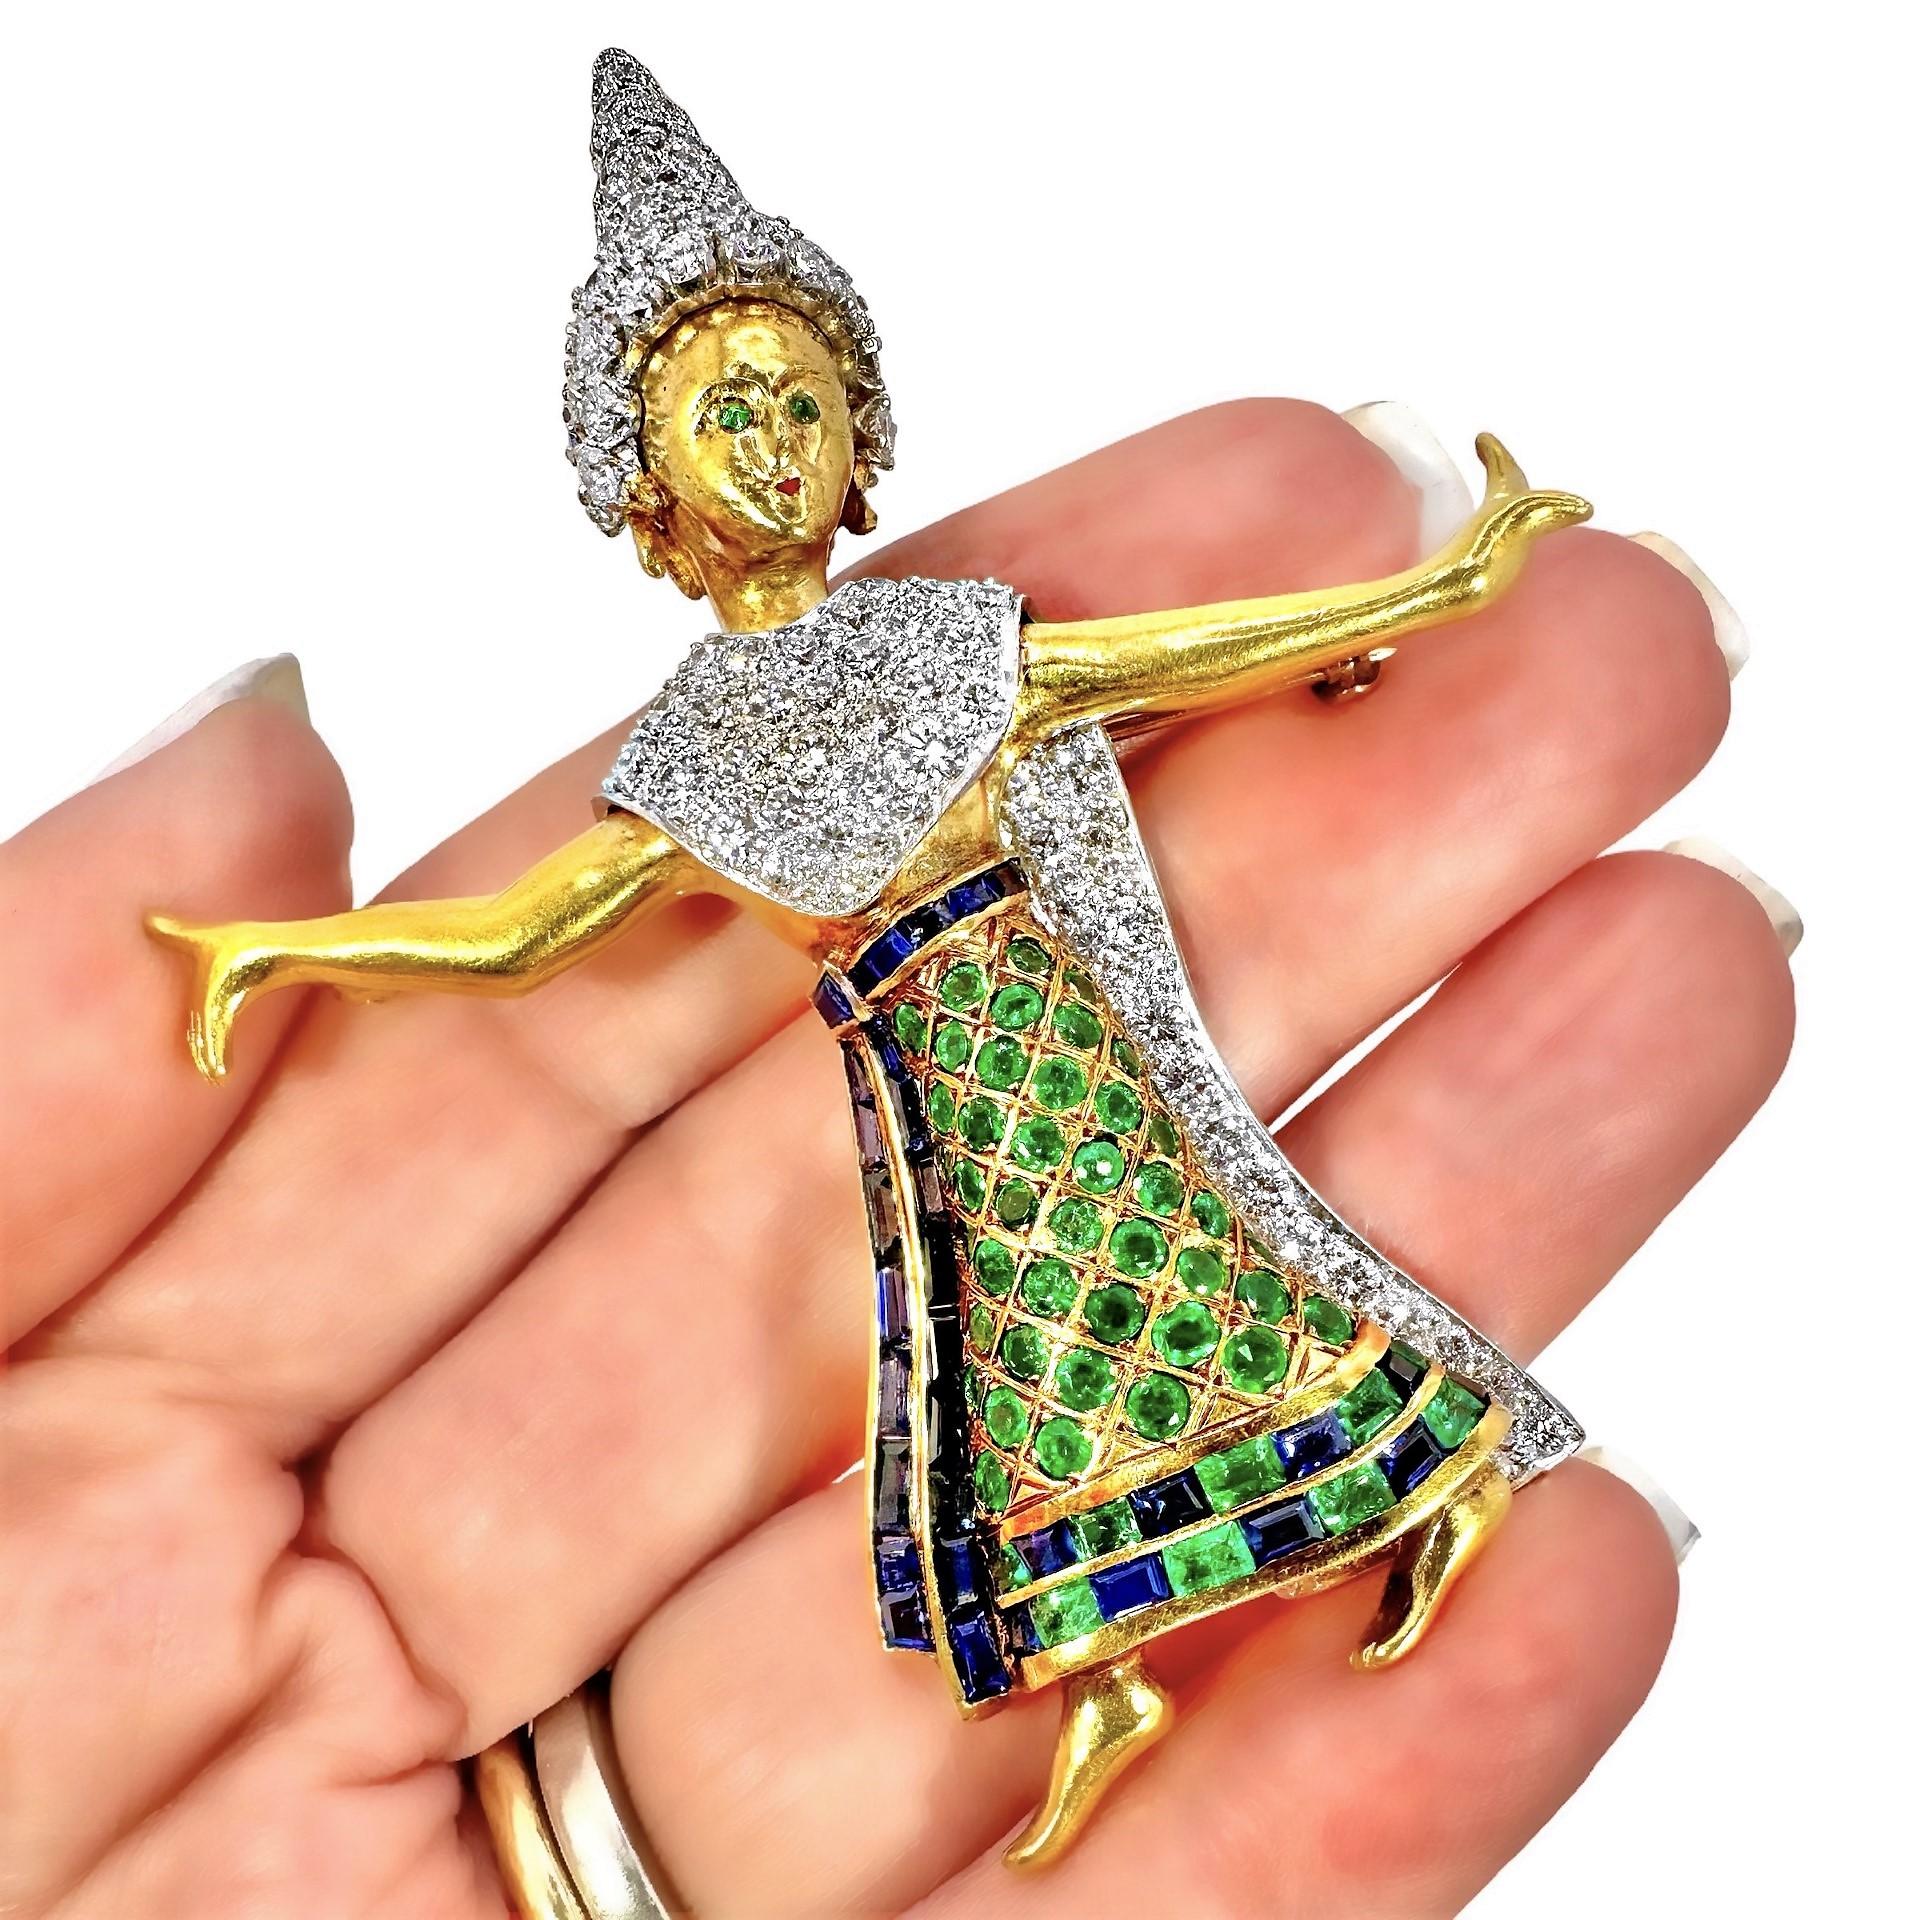 Amazing Thai Classical Dancer Brooch w/Emeralds, Sapphires and Diamonds In Good Condition For Sale In Palm Beach, FL